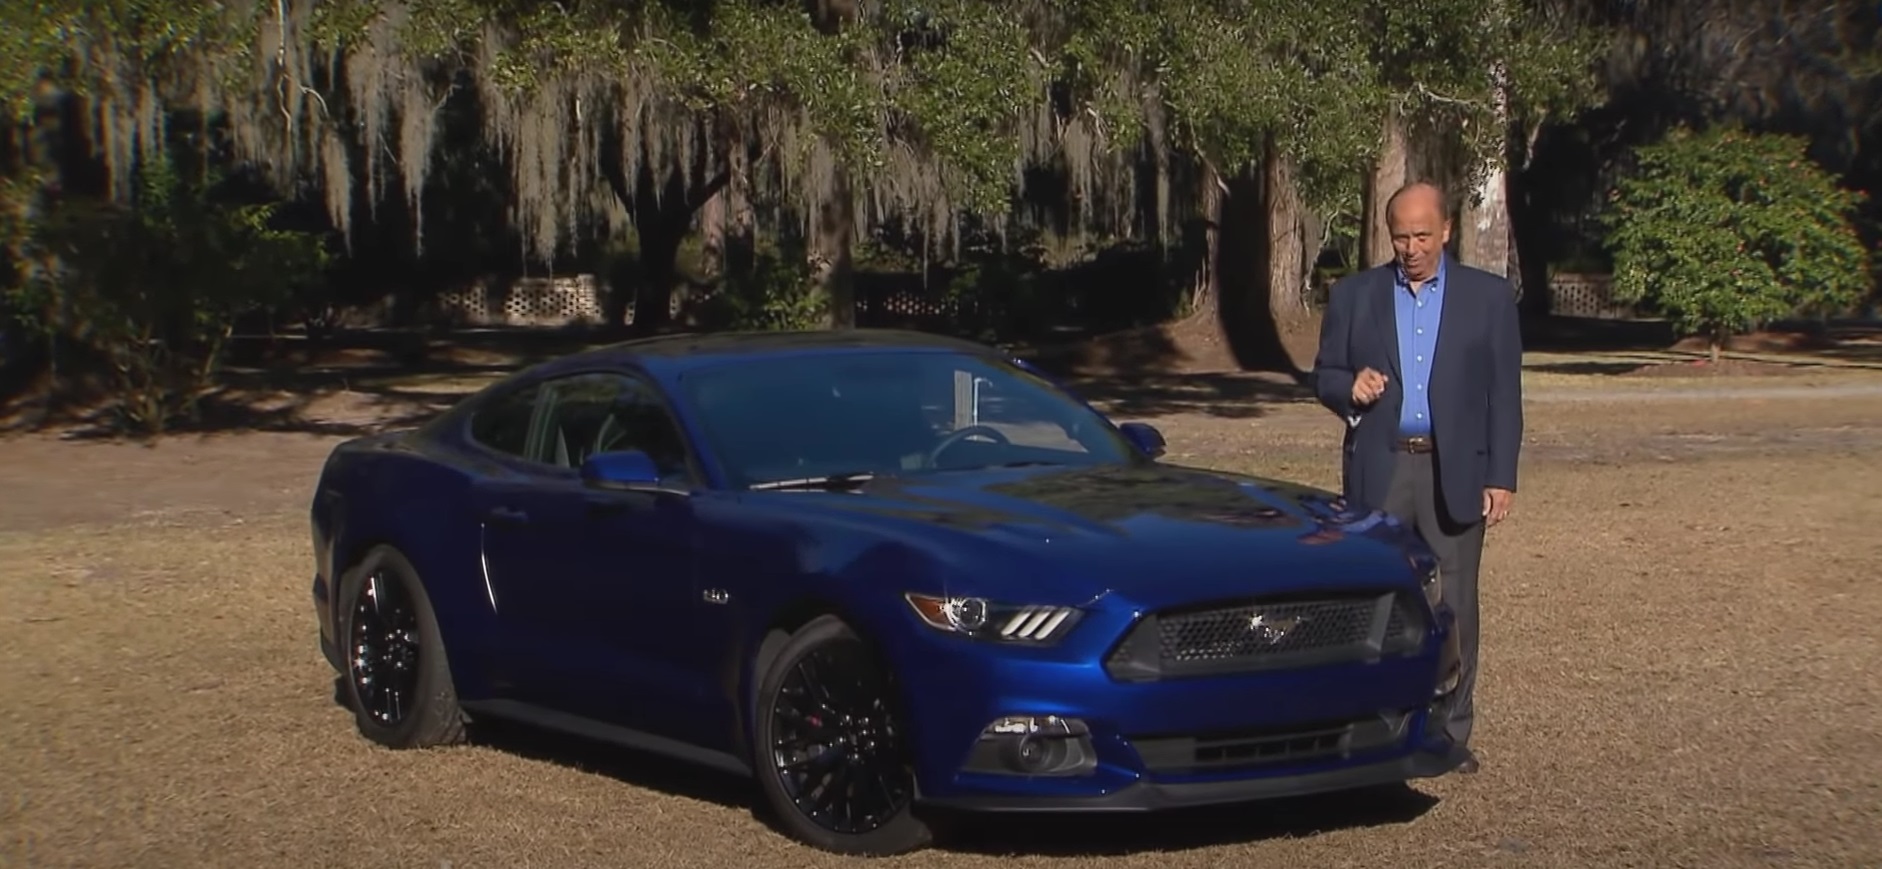 Video: Road Test- 2015 Ford Mustang GT